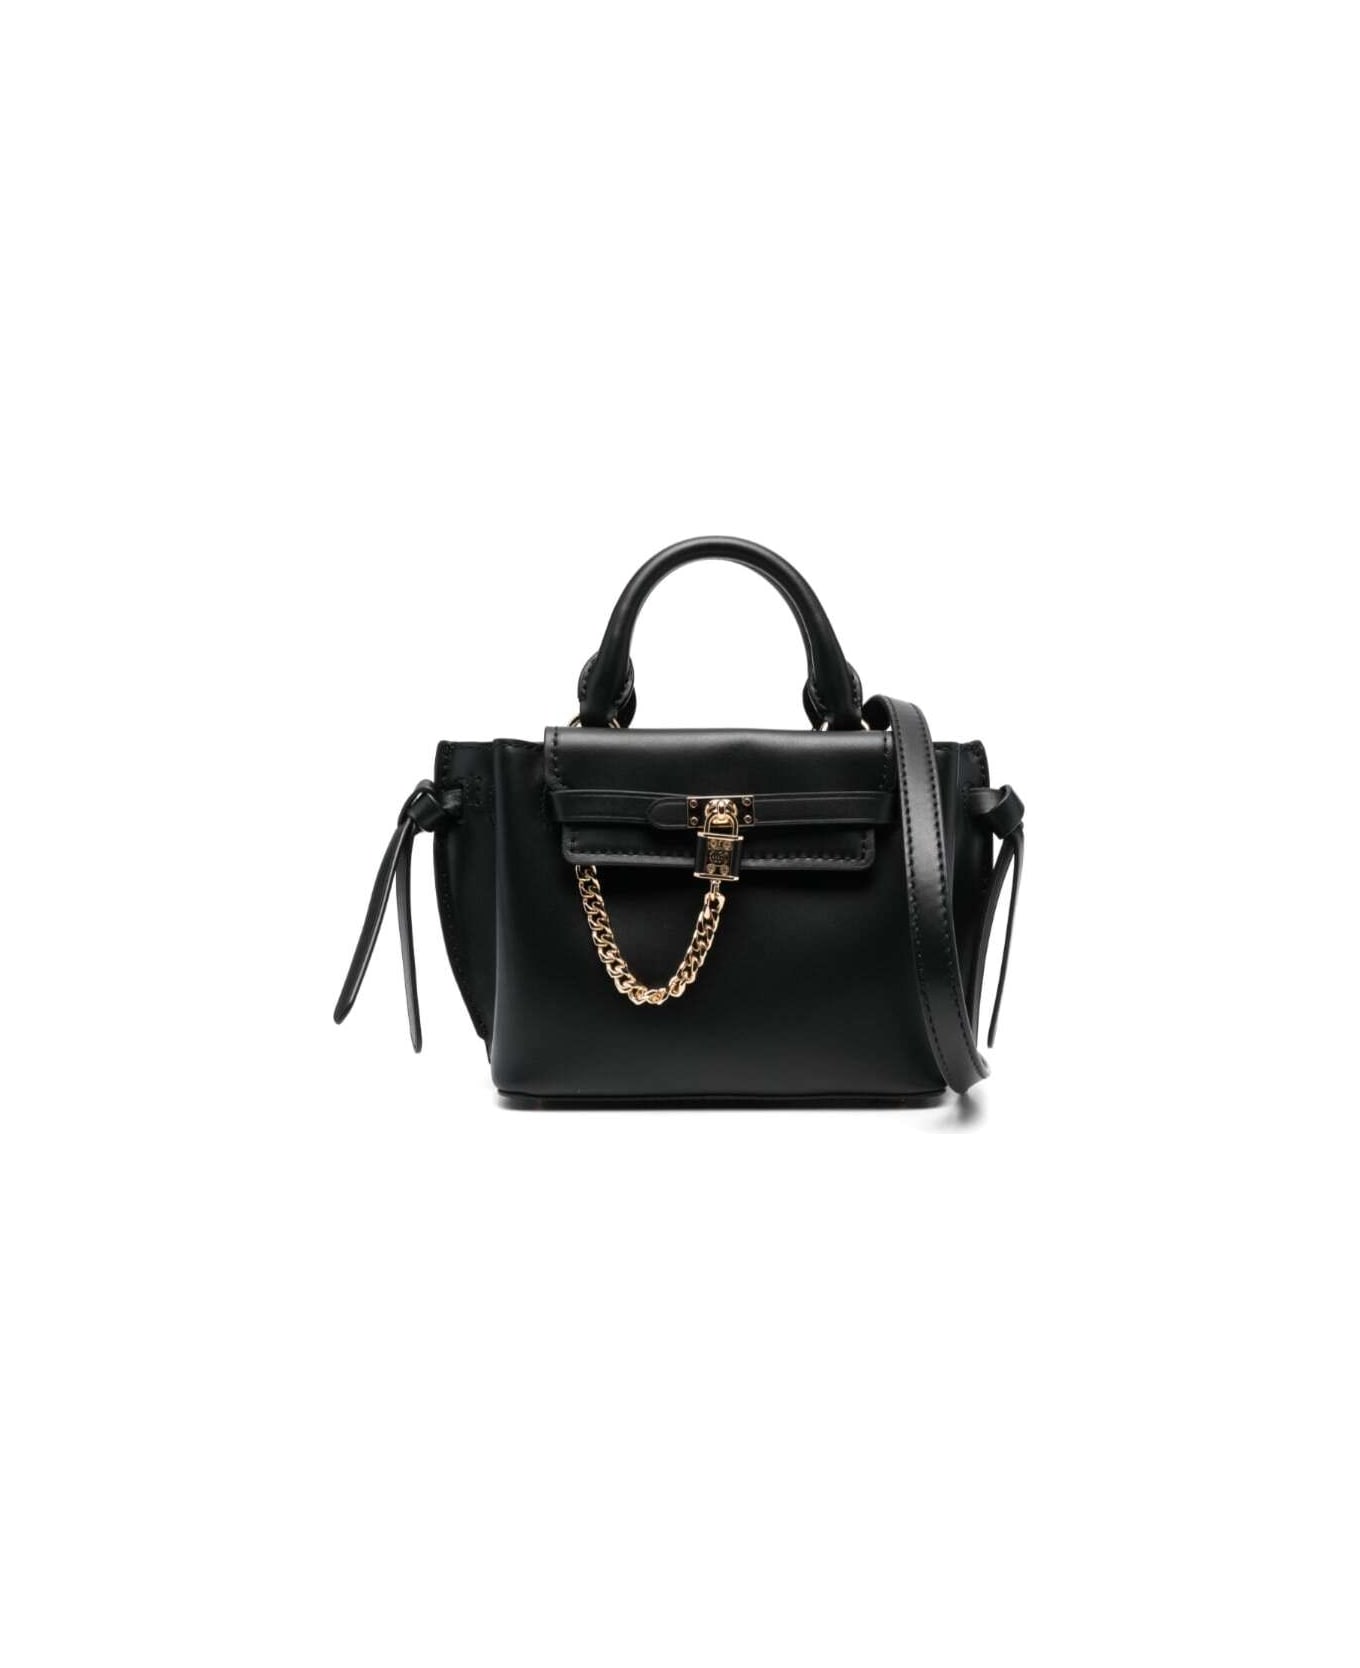 MICHAEL Michael Kors 'hamilton Legacy' Small Black Shoulder Bag With Branded Padlock In Smooth Leather Woman - Black